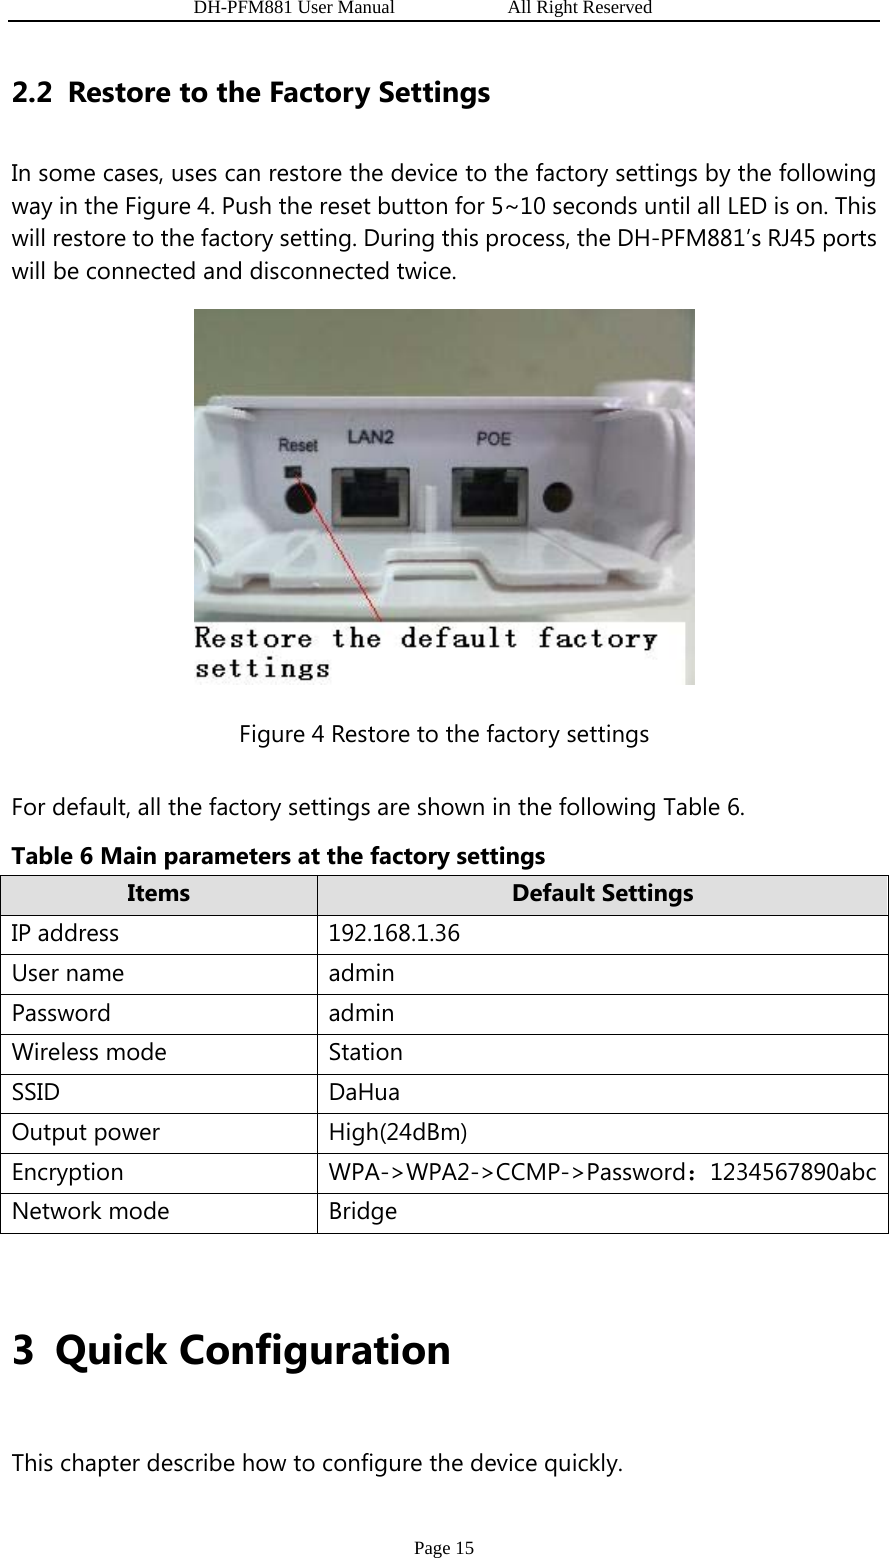                   DH-PFM881 User Manual            All Right Reserved Page 15 2.2 Restore to the Factory Settings In some cases, uses can restore the device to the factory settings by the following way in the Figure 4. Push the reset button for 5~10 seconds until all LED is on. This will restore to the factory setting. During this process, the DH-PFM881’s RJ45 ports will be connected and disconnected twice.  Figure 4 Restore to the factory settings For default, all the factory settings are shown in the following Table 6. Table 6 Main parameters at the factory settings Items  Default Settings IP address  192.168.1.36 User name  admin Password admin Wireless mode  Station SSID DaHua Output power  High(24dBm) Encryption WPA-&gt;WPA2-&gt;CCMP- ：&gt;Password 1234567890abcNetwork mode  Bridge  3 Quick Configuration  This chapter describe how to configure the device quickly. 